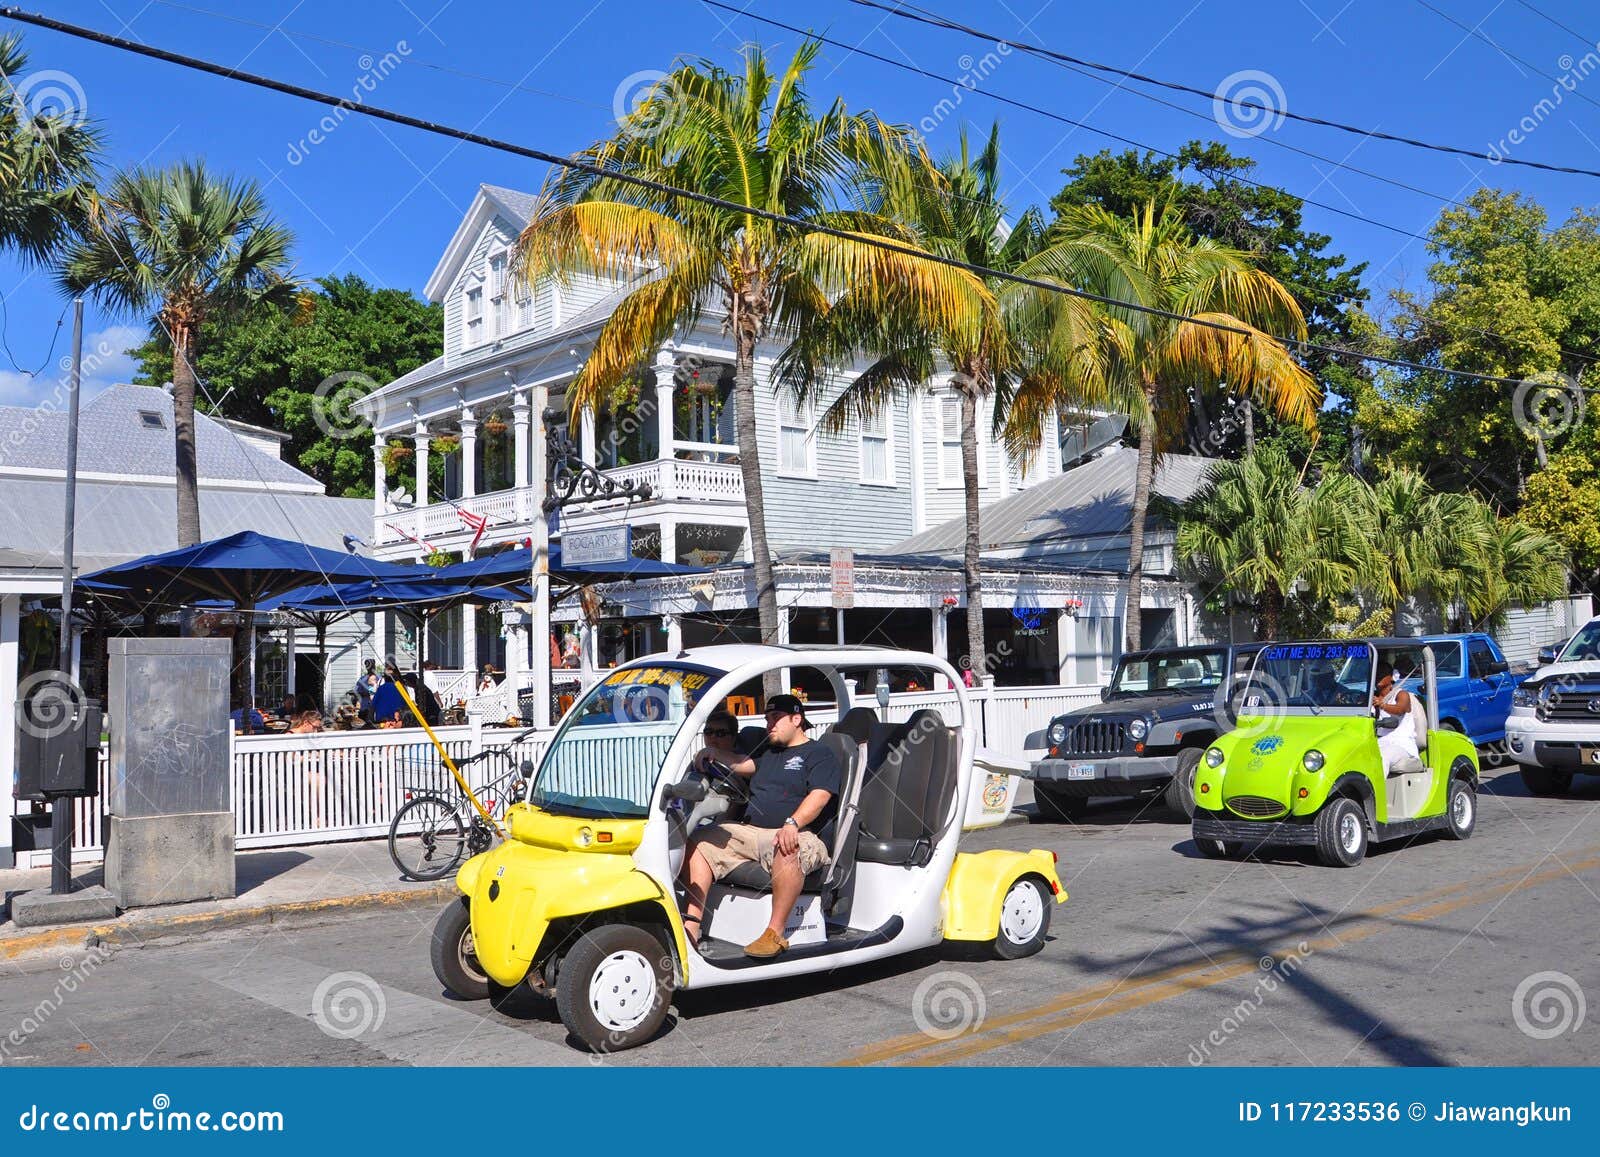 Electric Rental Car In Key West, Florida Editorial Photo - Image of